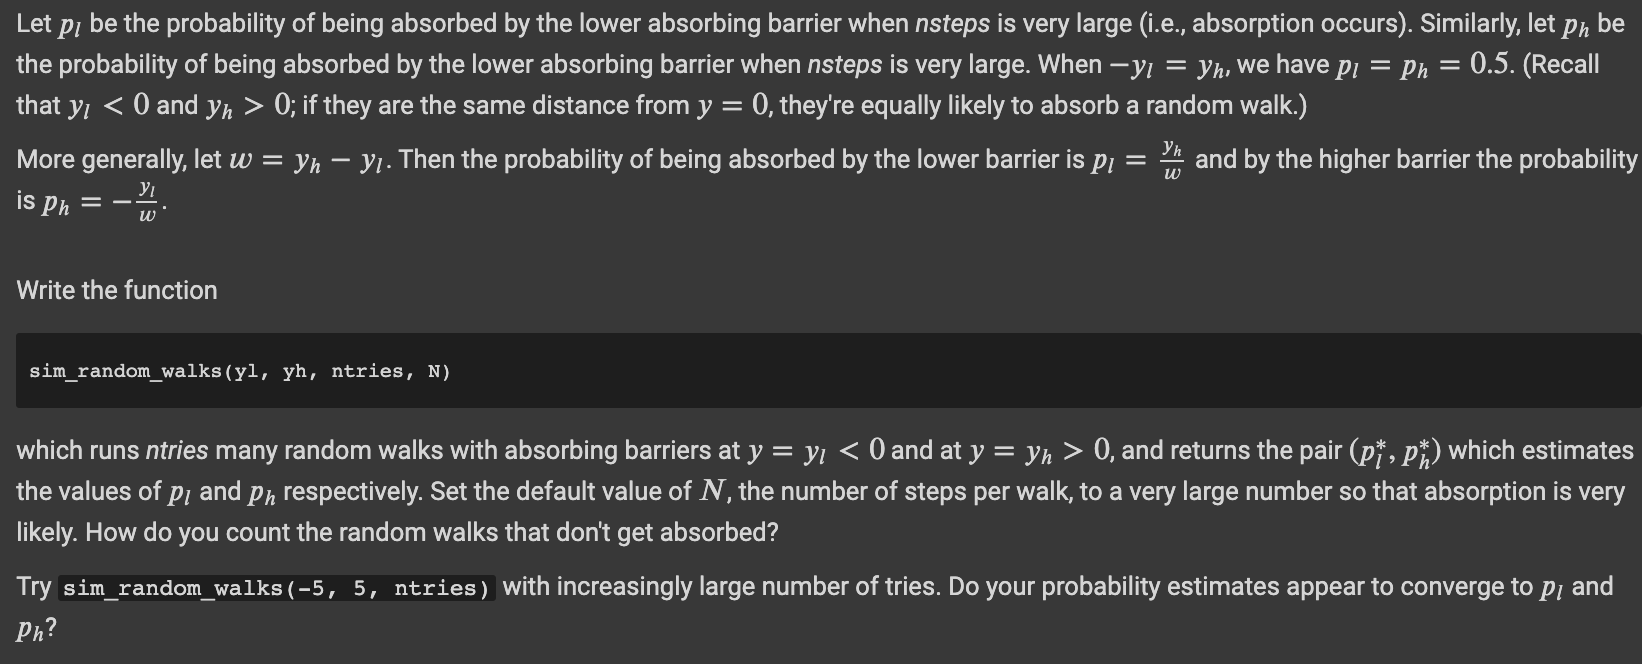 Let pi be the probability of being absorbed by the lower absorbing barrier when nsteps is very large (i.e.,